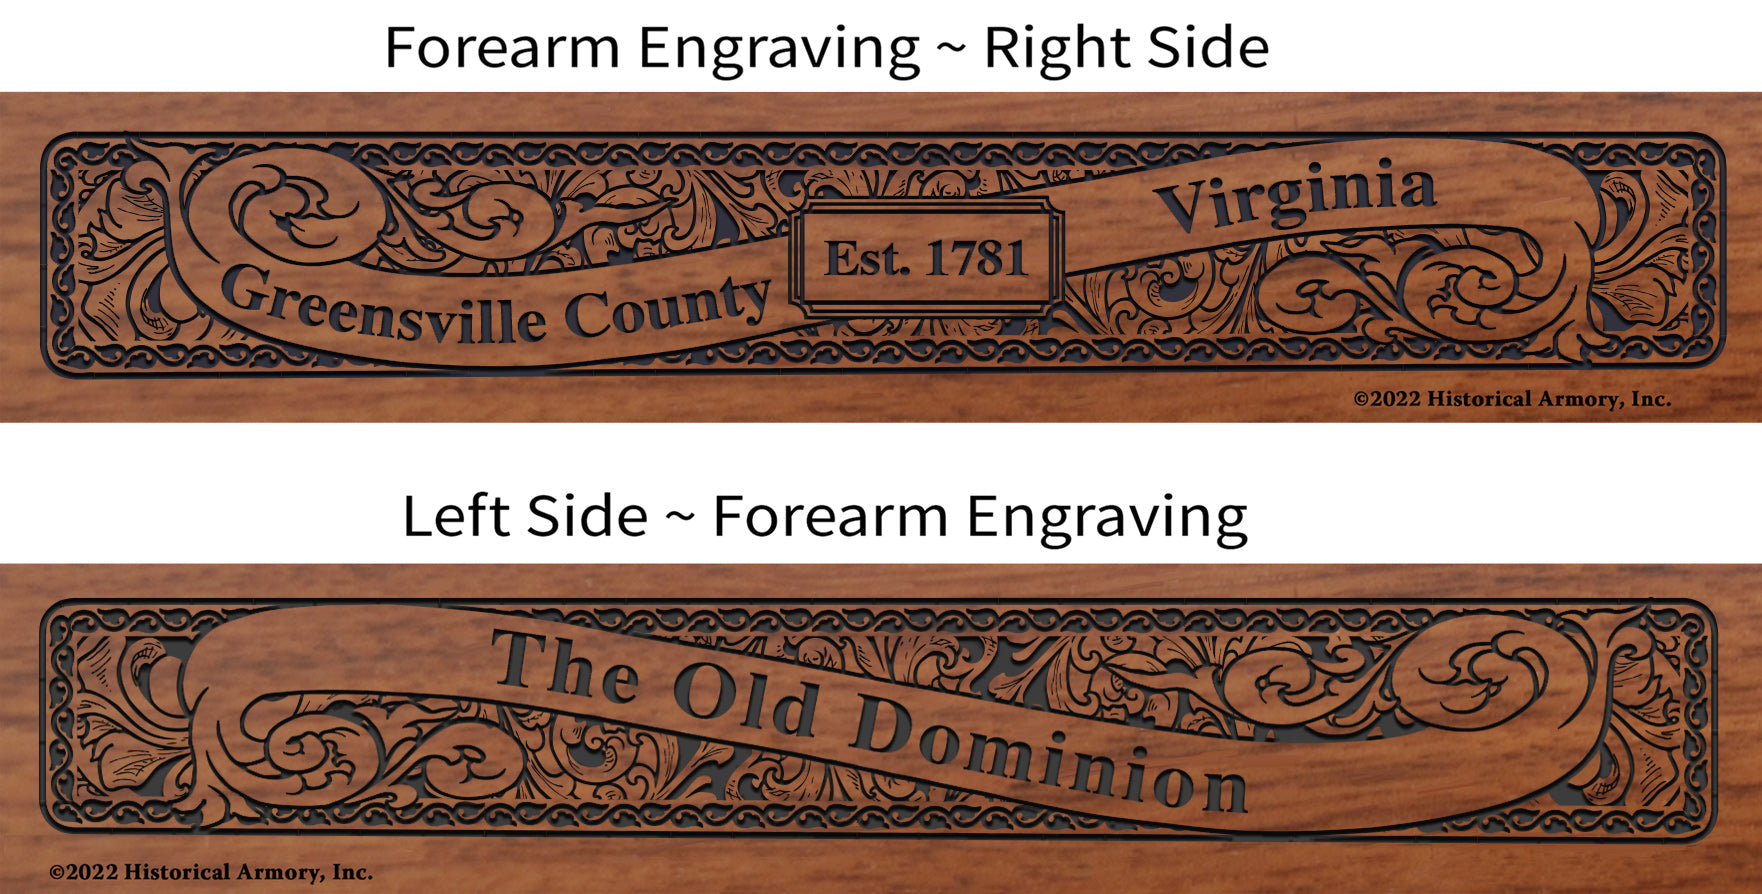 Greensville County Virginia Engraved Rifle Forearm